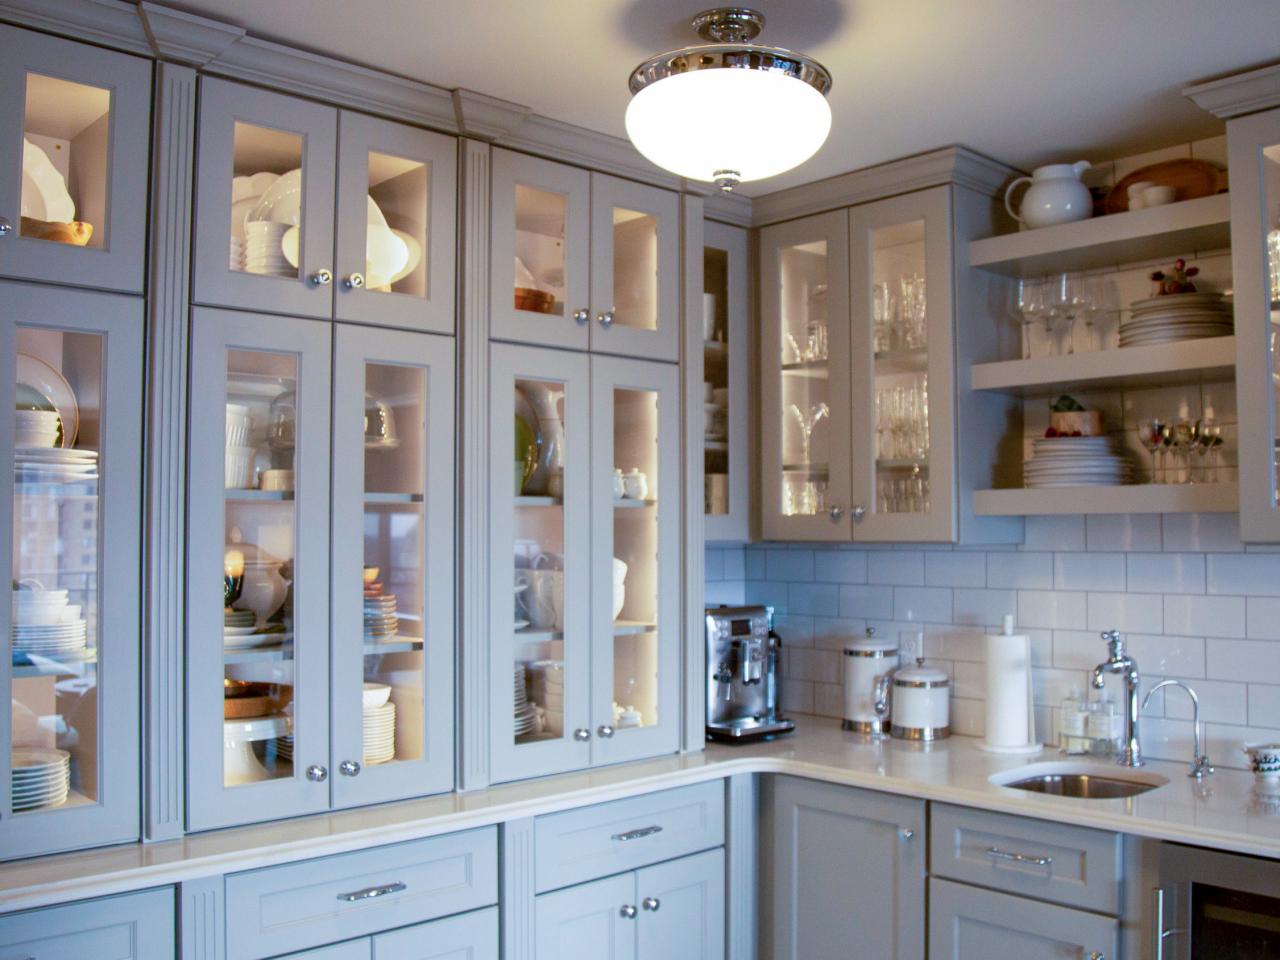 How to Choose the Right Kitchen Cabinets